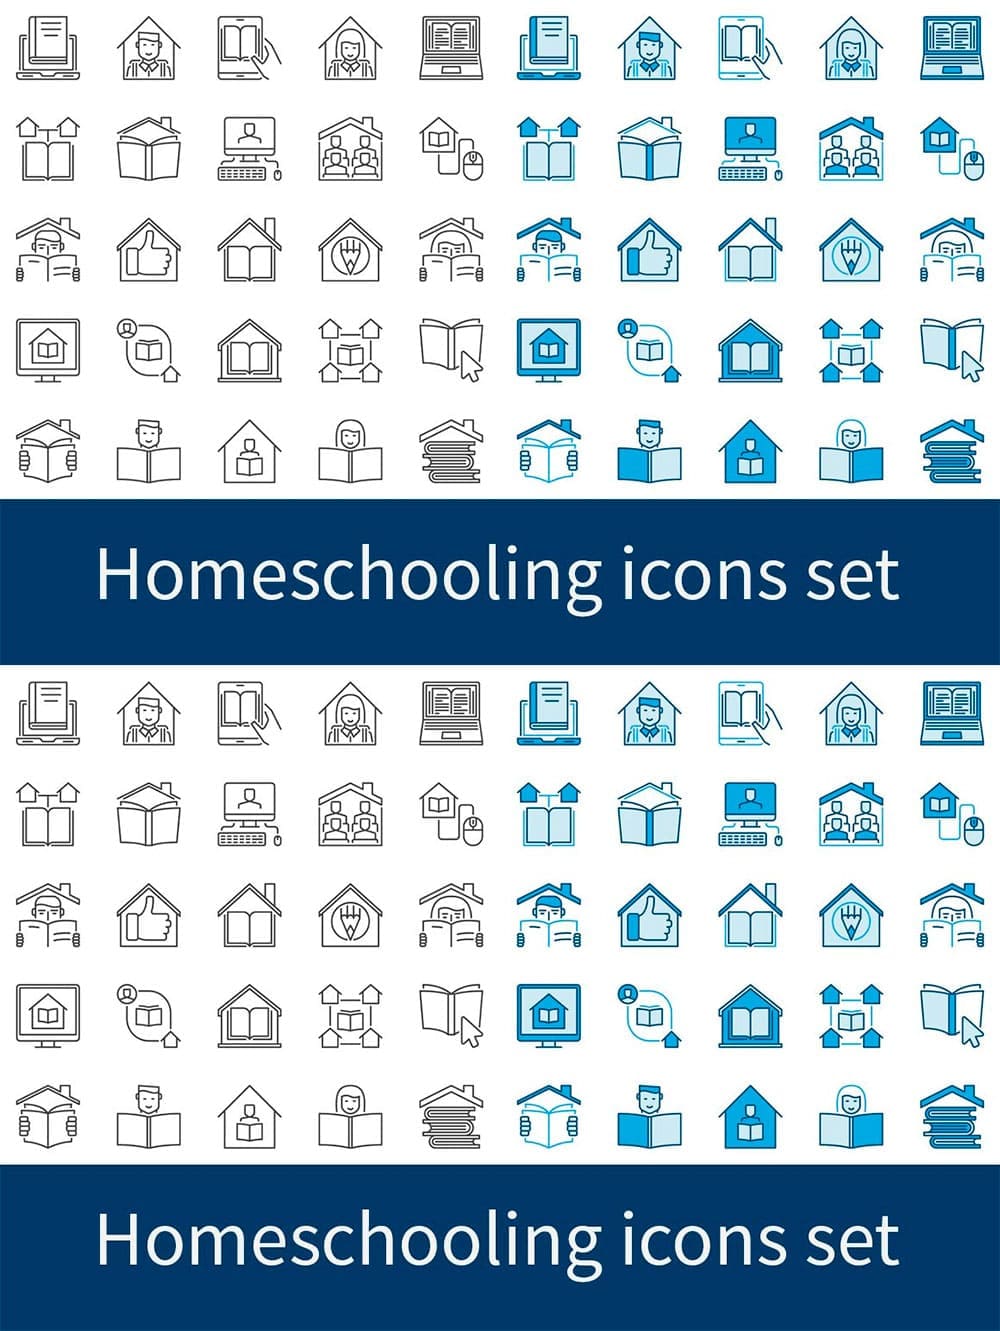 Homeschooling icons set, picture for pinterest.